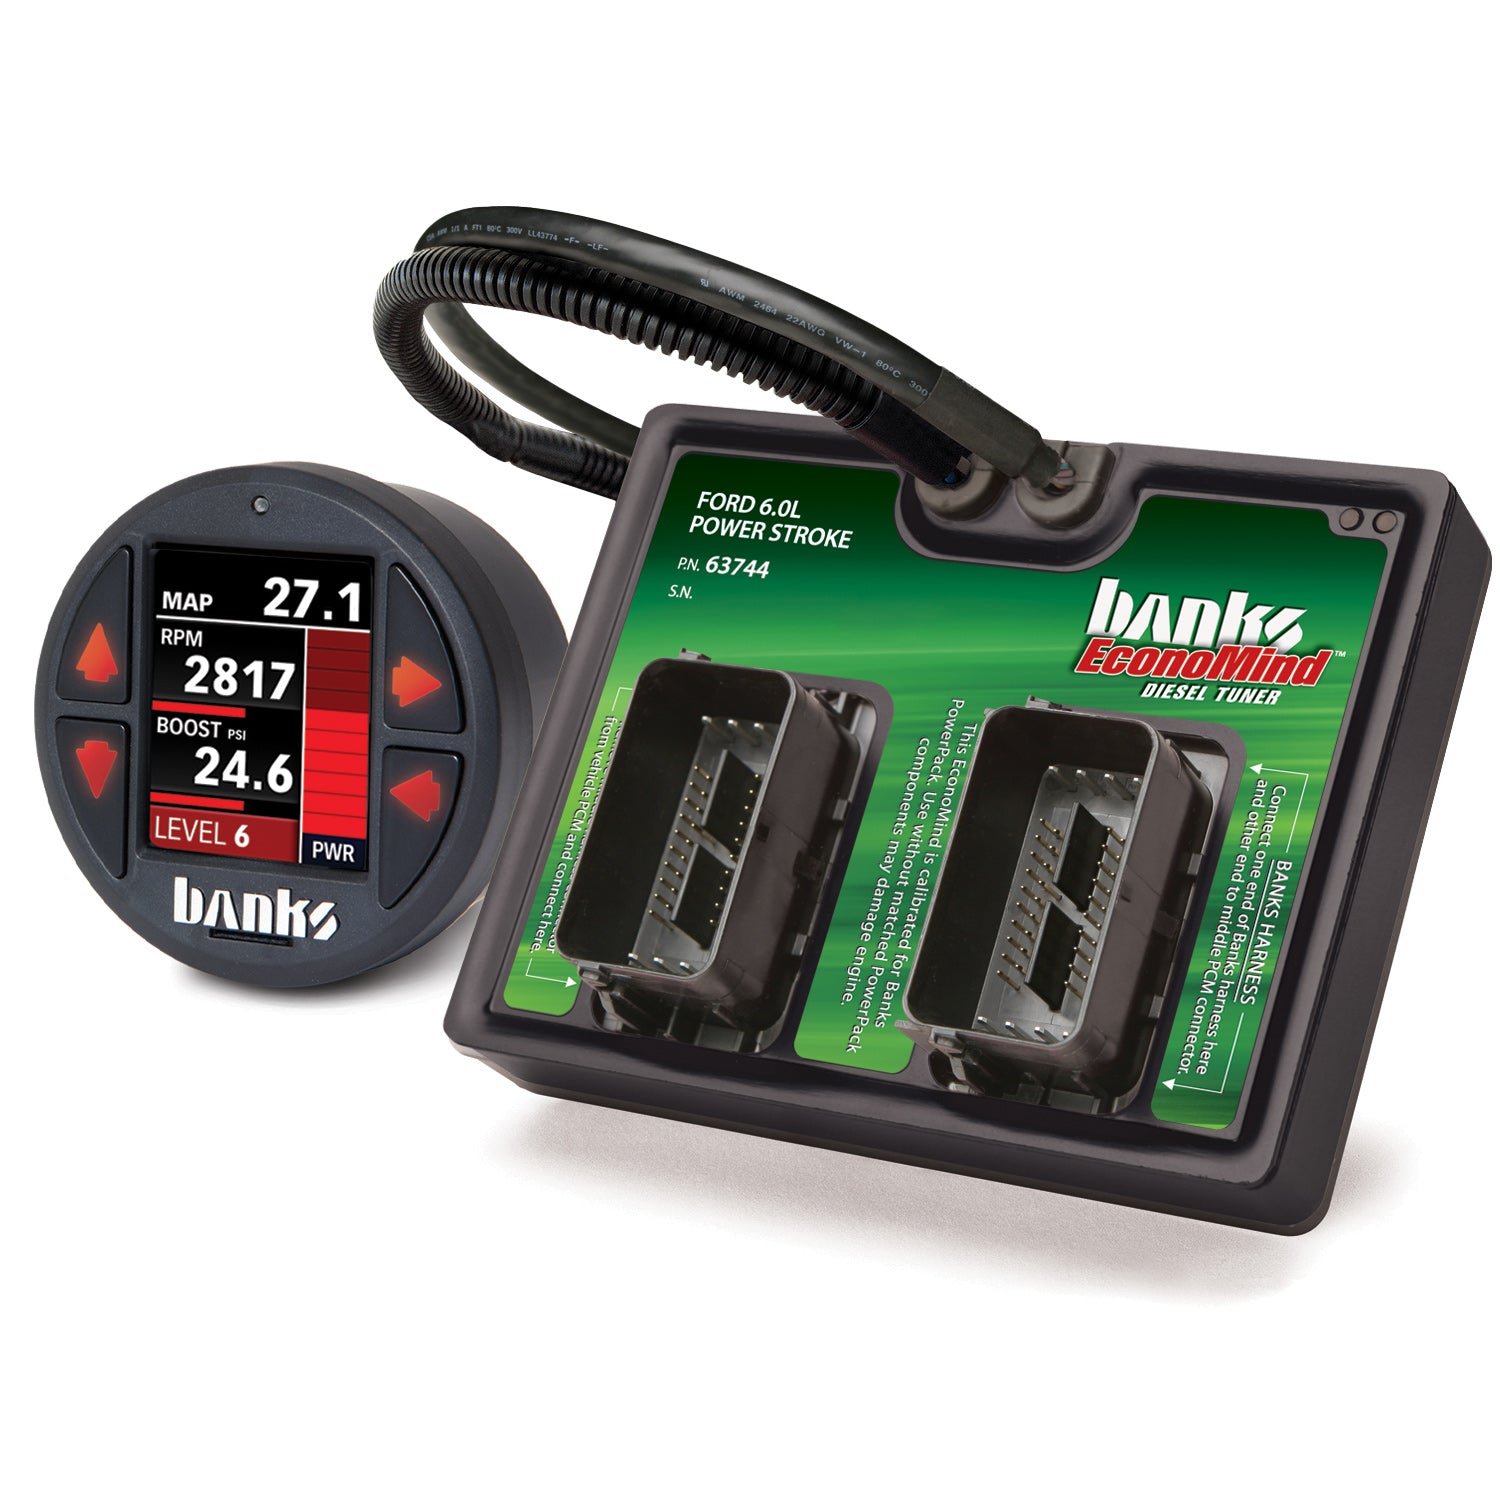 The Banks EconoMind Diesel Tuner and iDash SuperGauge for 2003-2007 Ford F250/F350/F450 6.0L Powerstroke